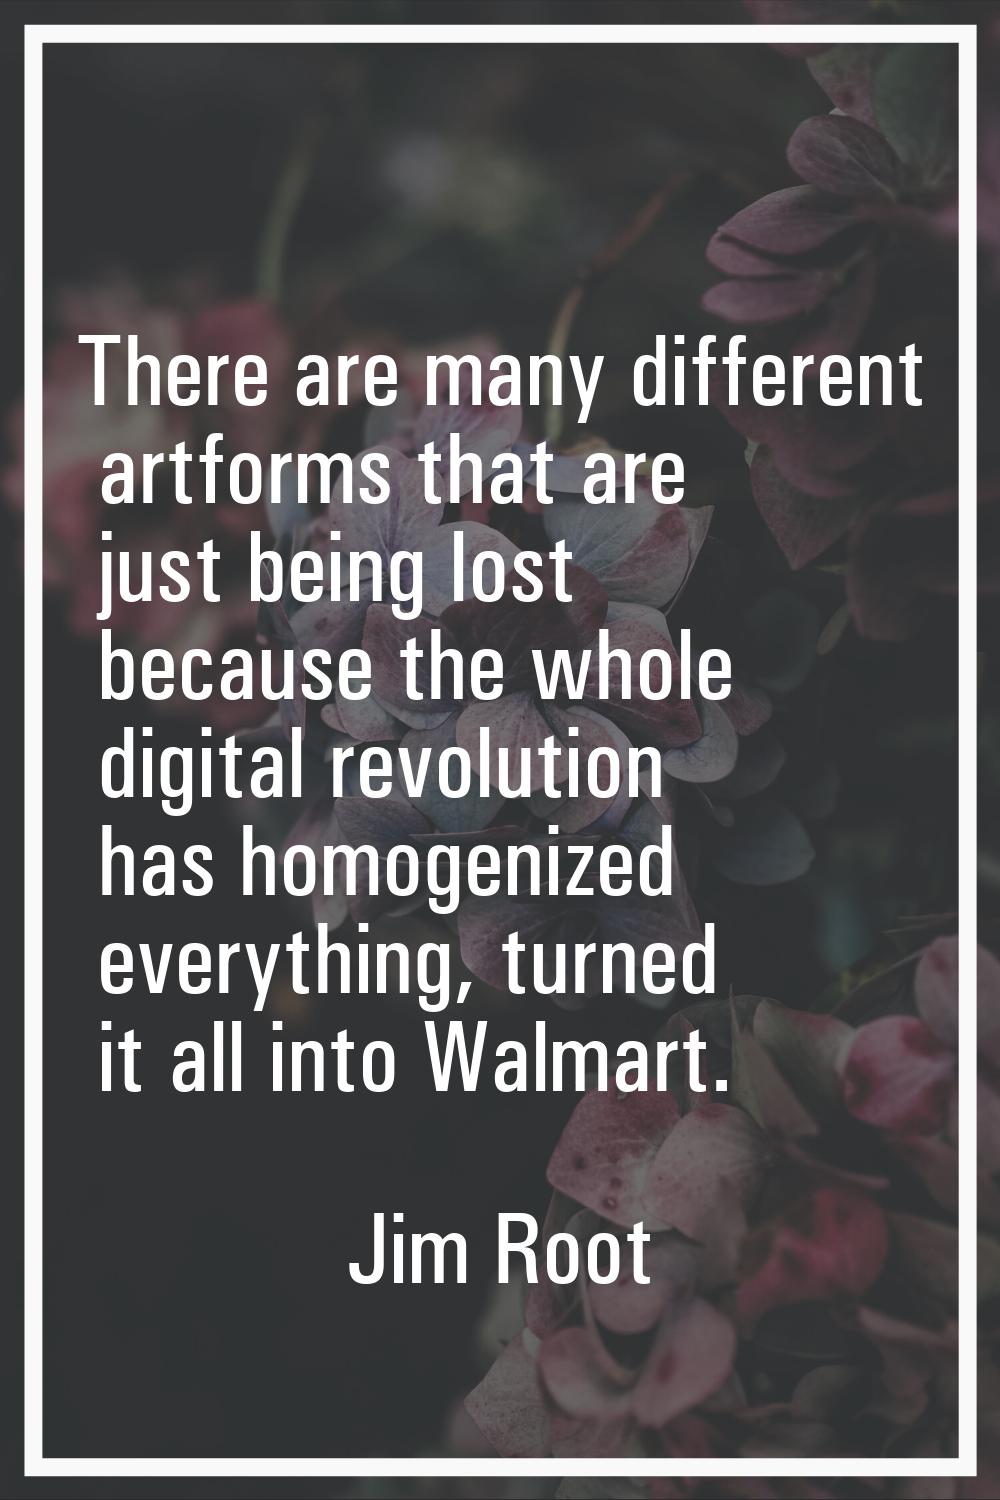 There are many different artforms that are just being lost because the whole digital revolution has